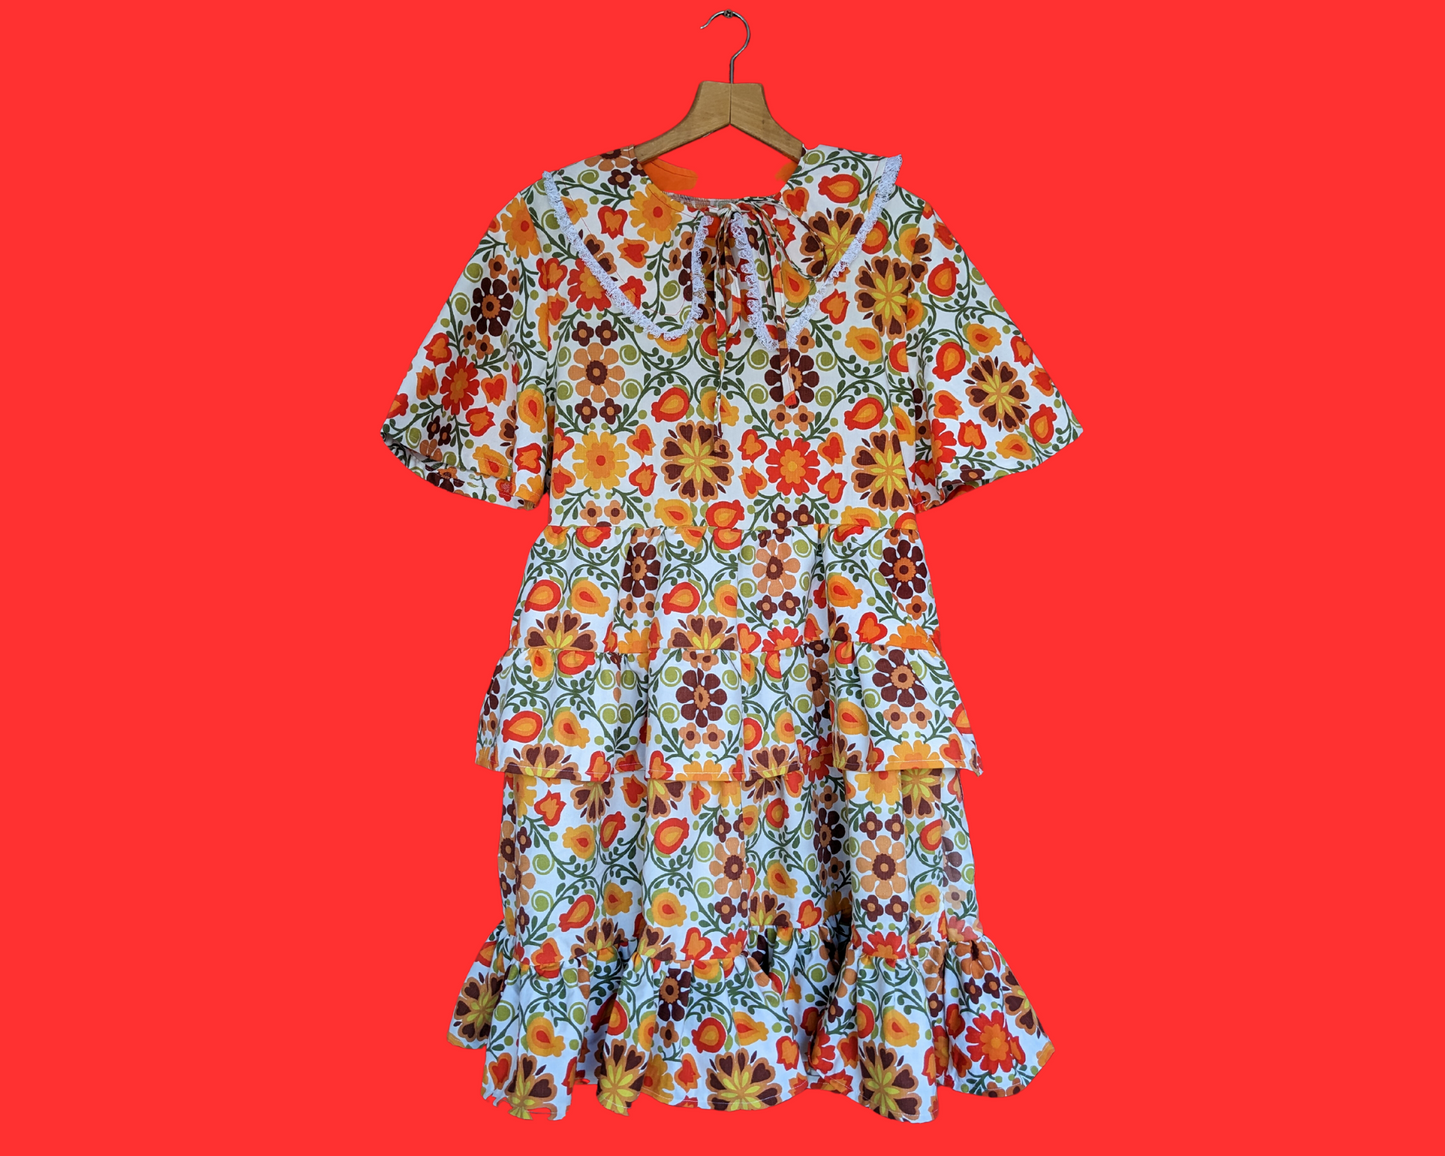 Handmade, Upcycled Vintage 1960's Floral Bedsheet Dress with Matching Detachable Collar Size M